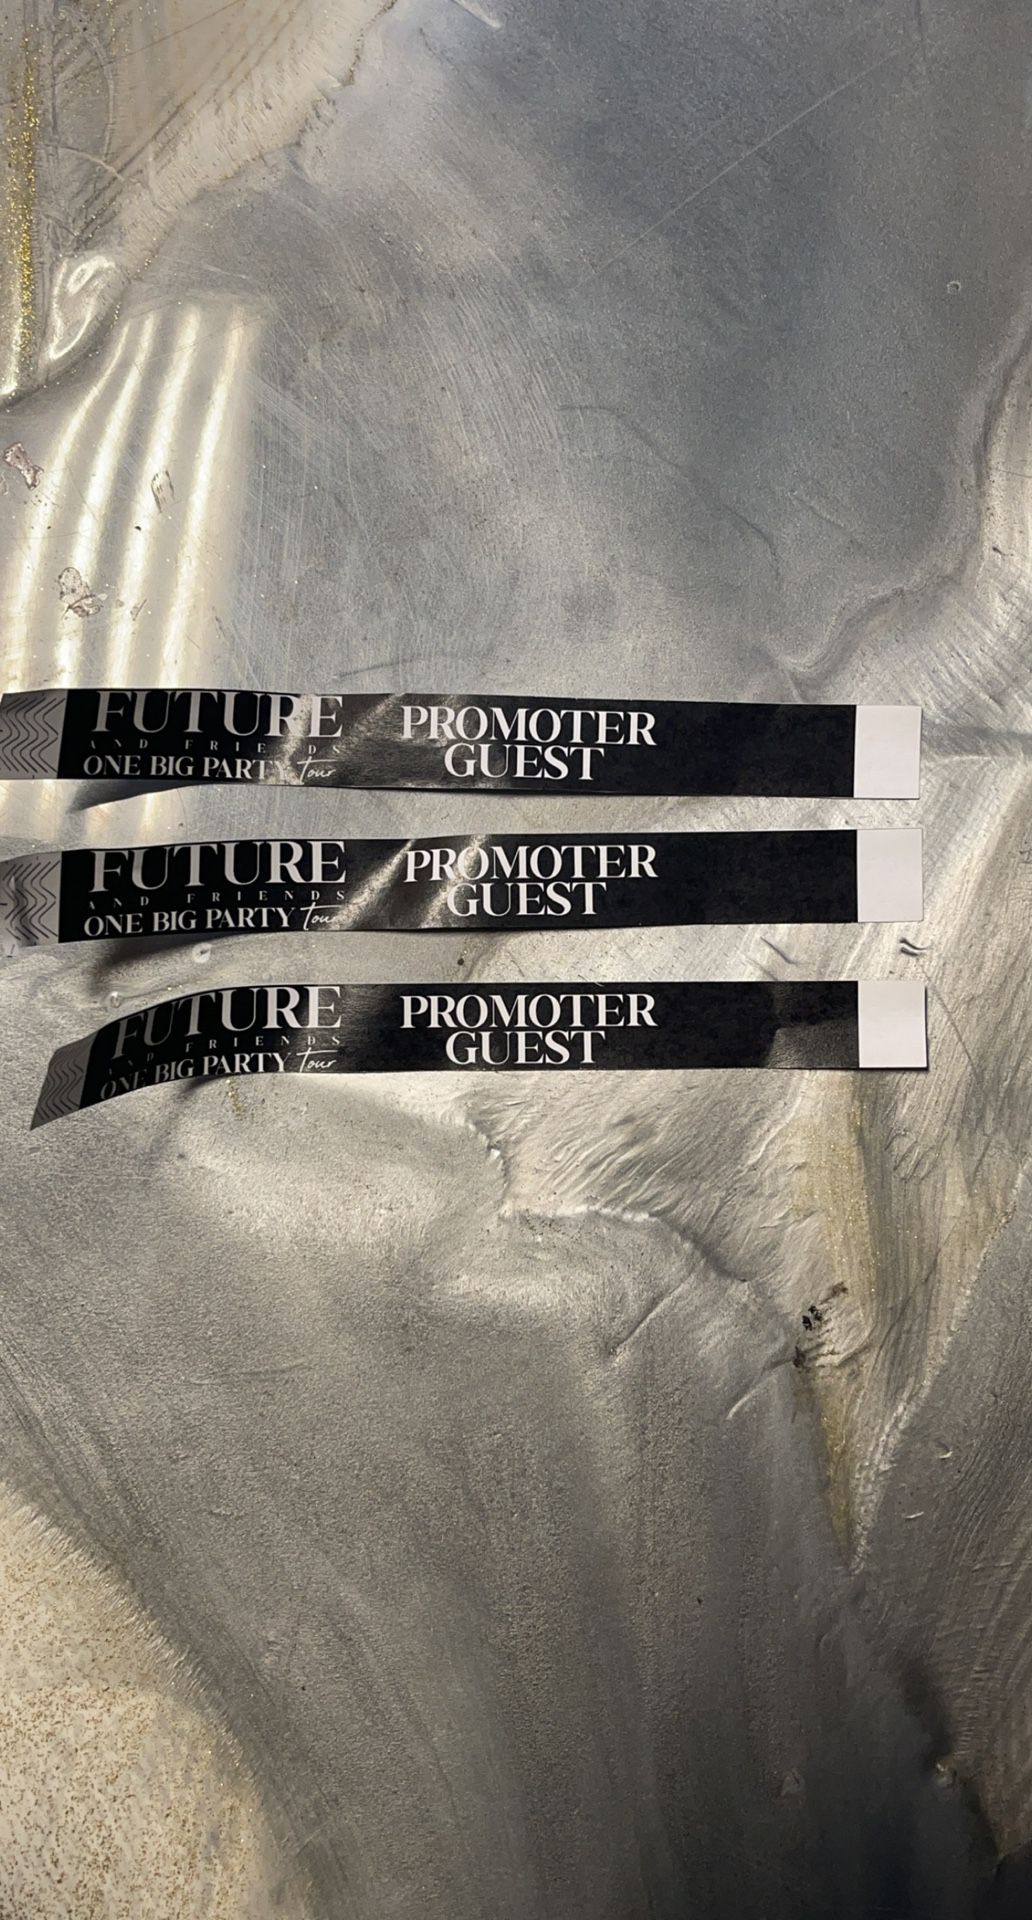 All Access Passes To Future Concert